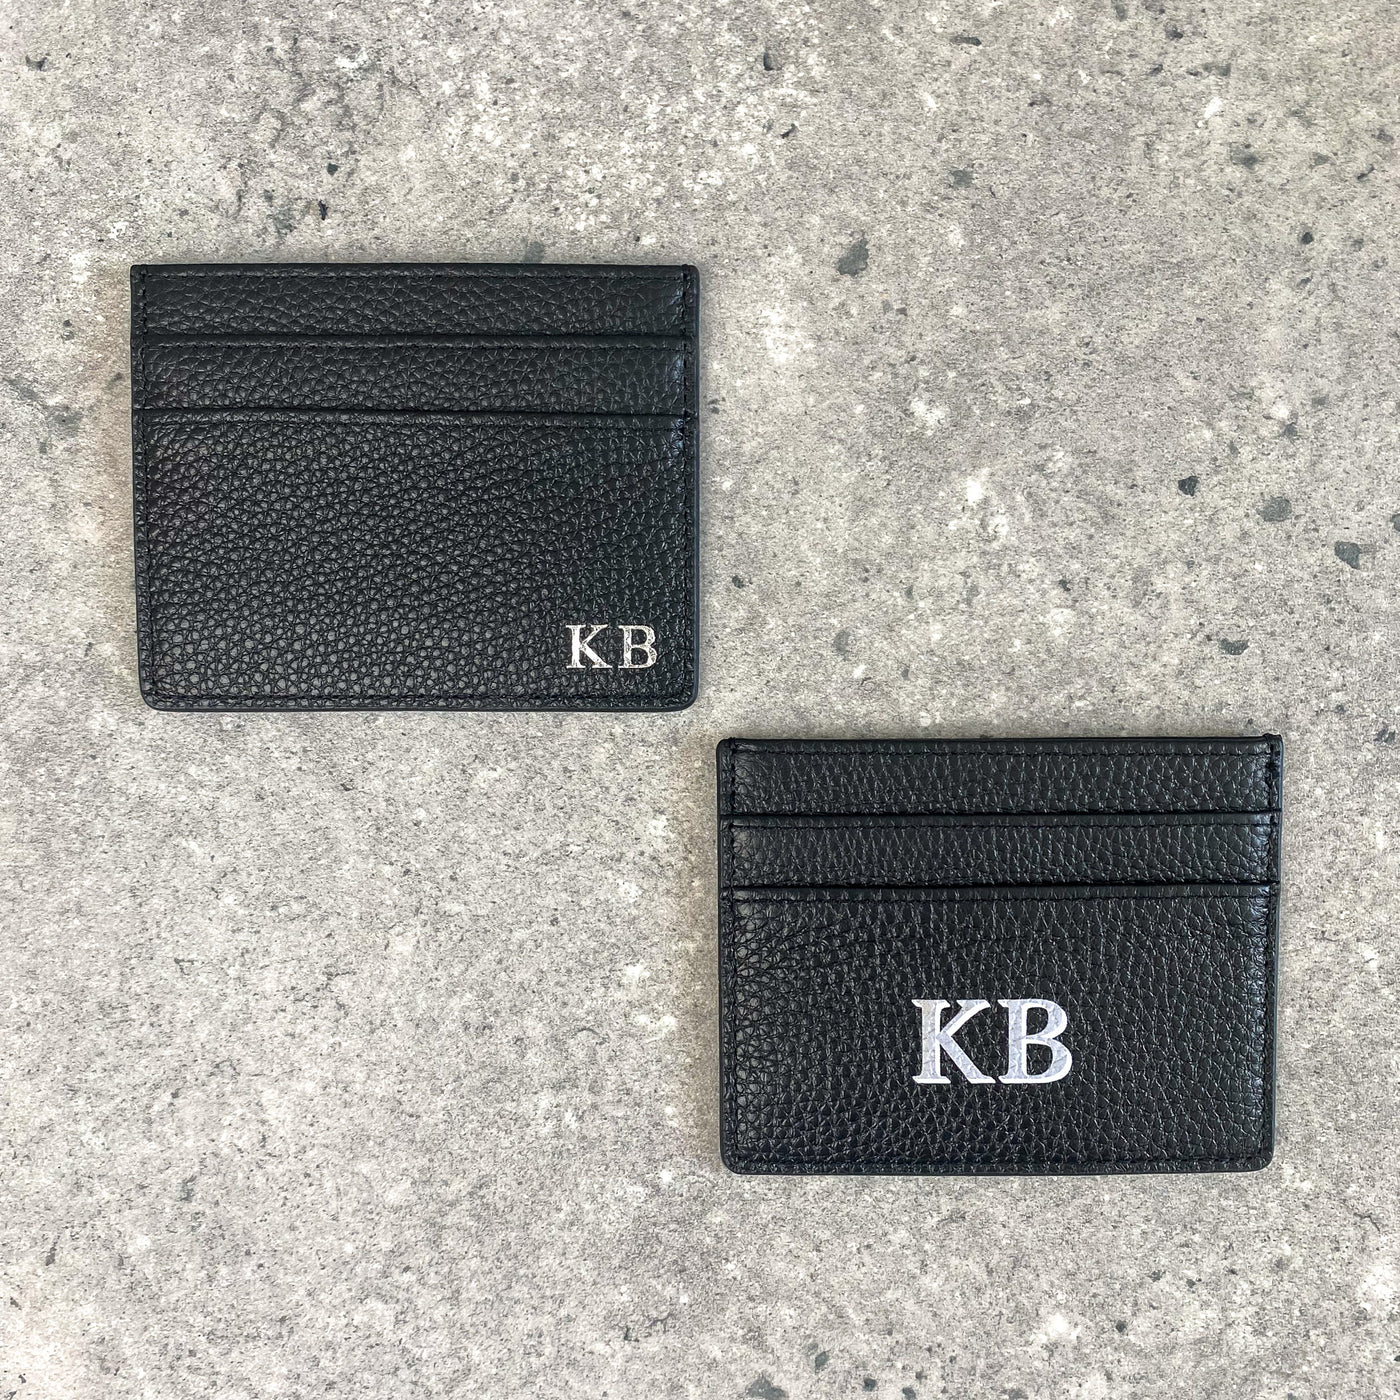 Black pebble leather card holder embossed with initials and black card holder with drop shadow